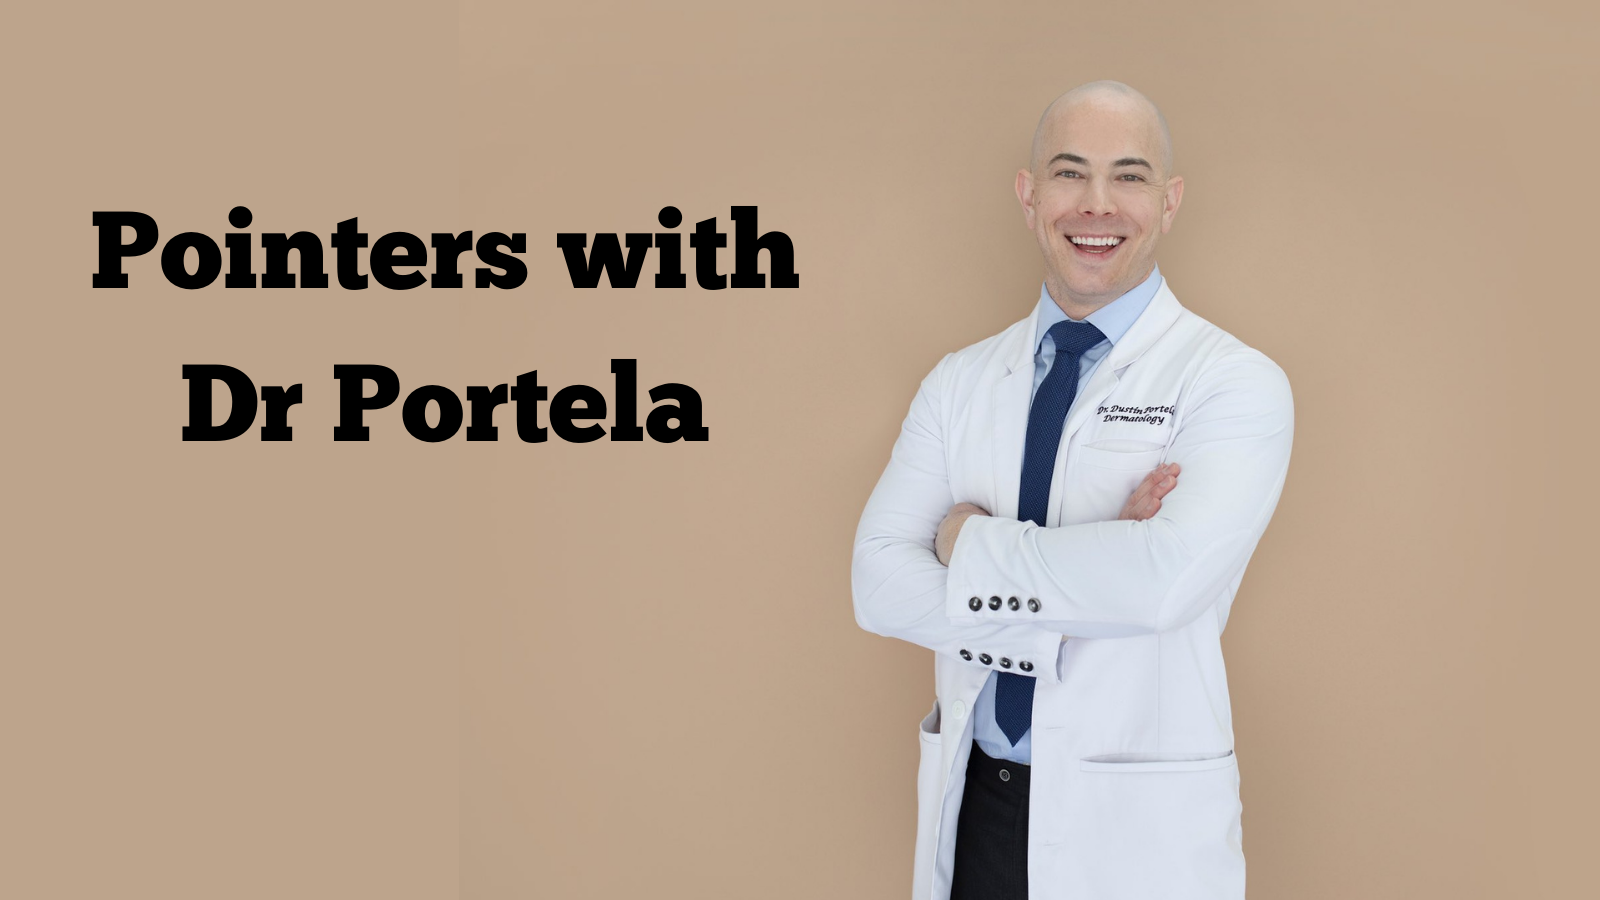 Pointers With Portela: Skin Care for Sensitive Skin 